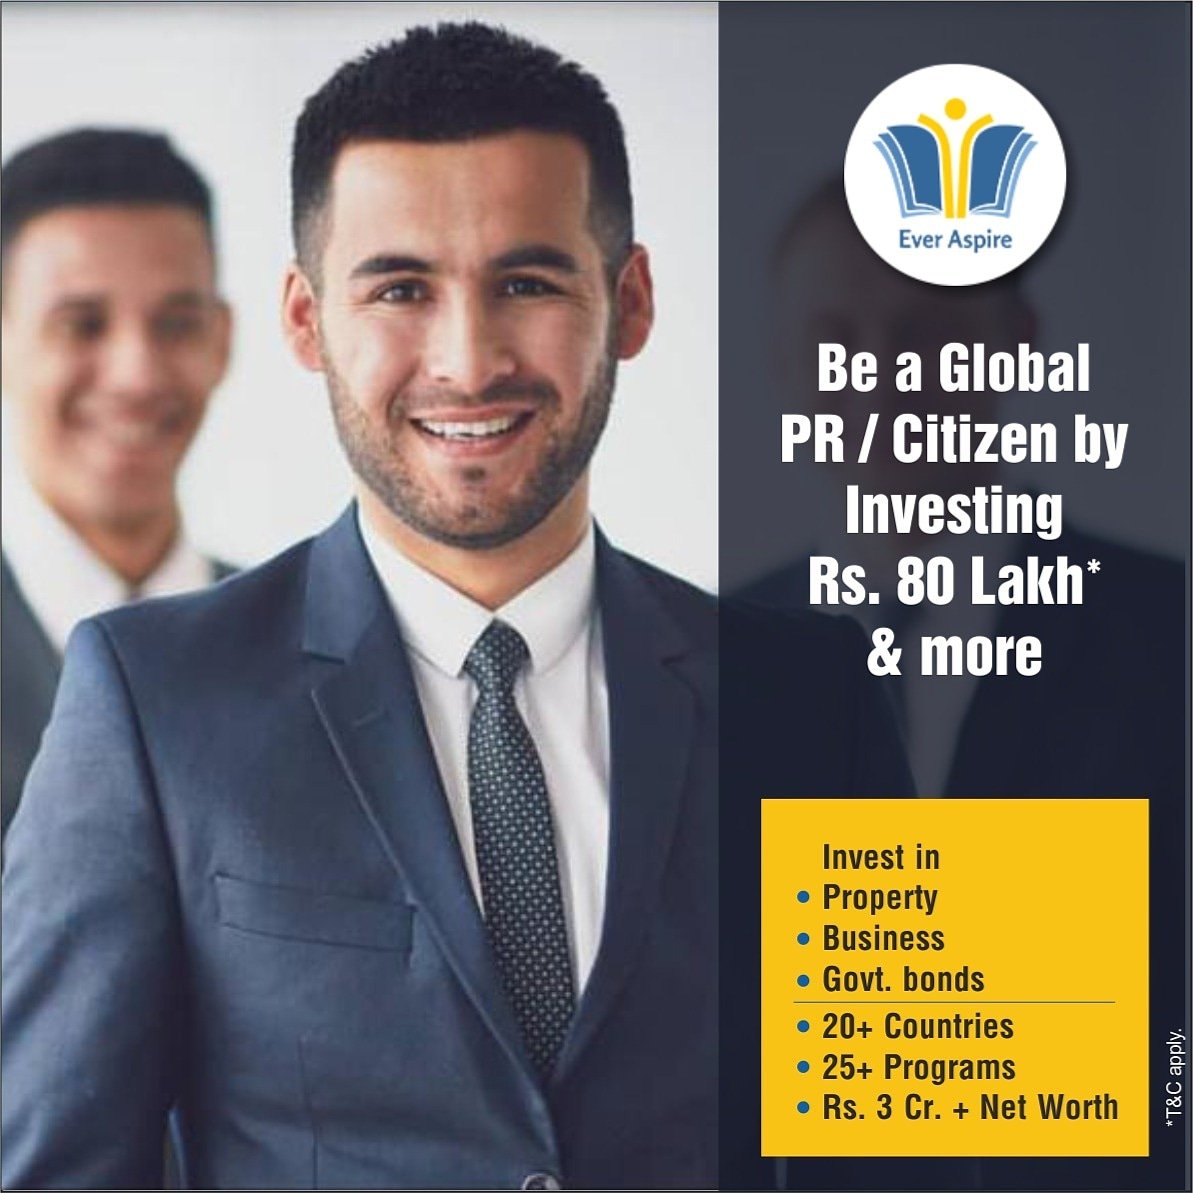 Be a Global PR/ Citizen by investing 80 Lakh* & more.
For expert guidance Call Now on +91 8657454590 or write to us at info@everaspire.in for Details.
 #immigration #settleabroad #everaspire #PR #Globalcitizen #liveabroad #everaspire